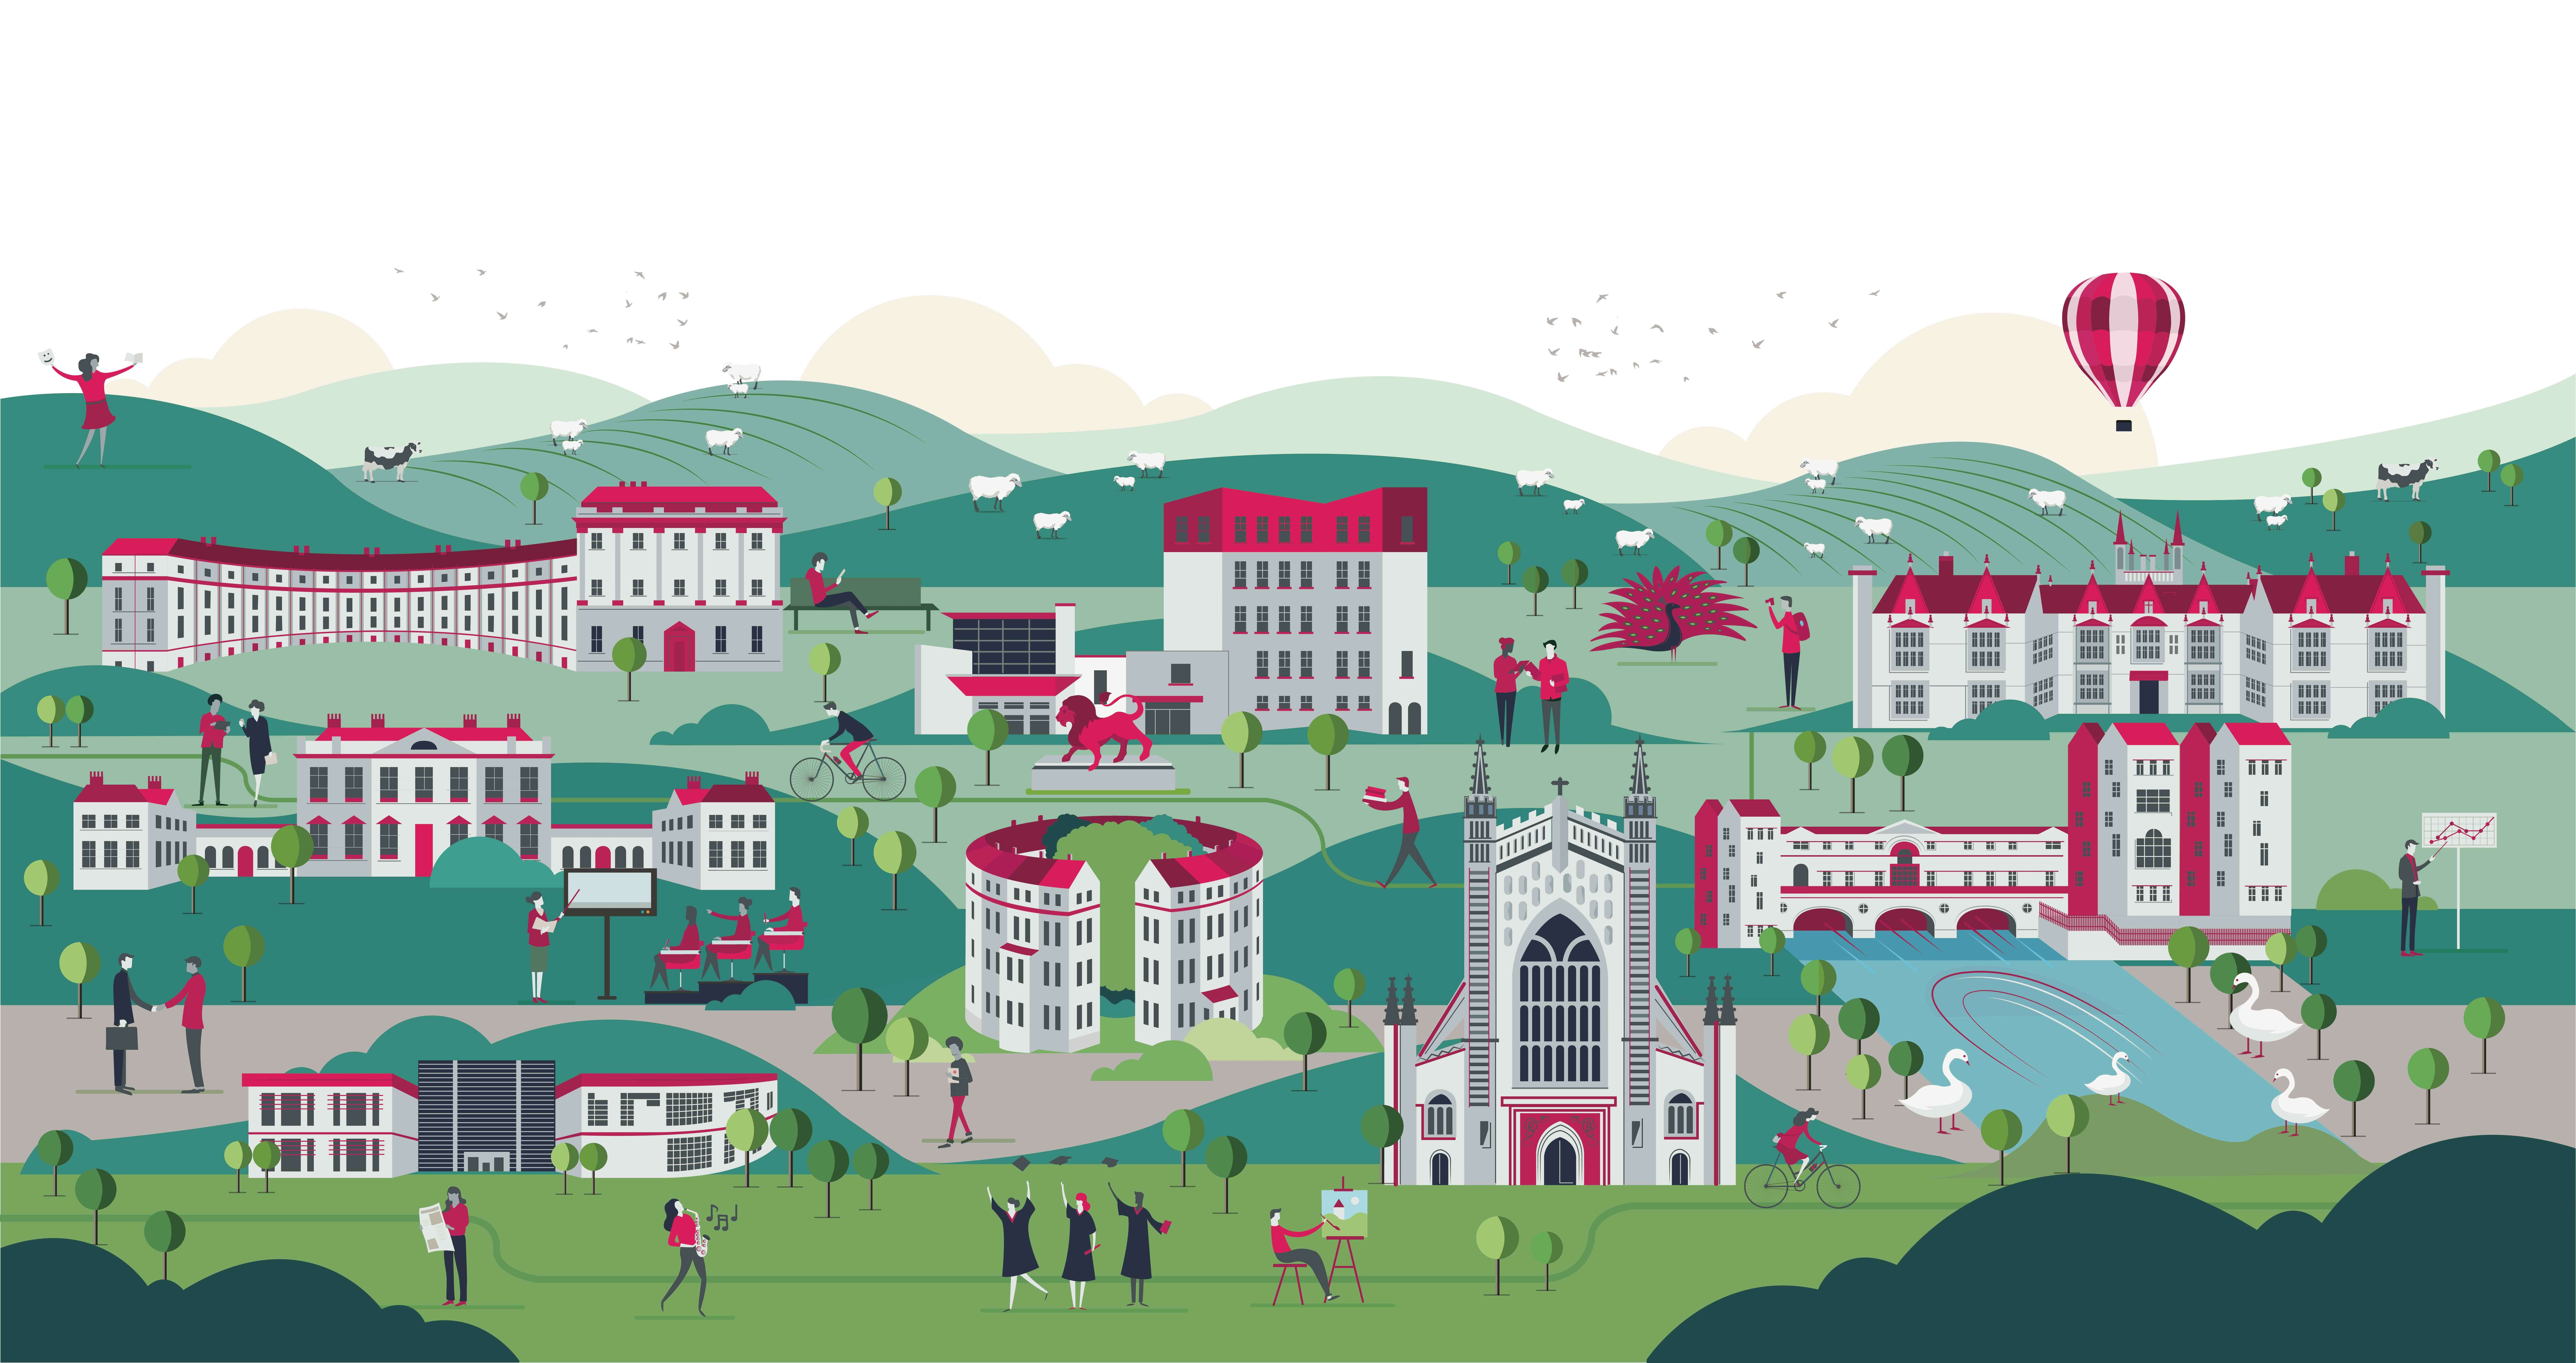 illustration of all Bath Spa campuses in greens and pinks. Behind this is a landcape view of the sky with a pink hot air balloon flying in the distance 